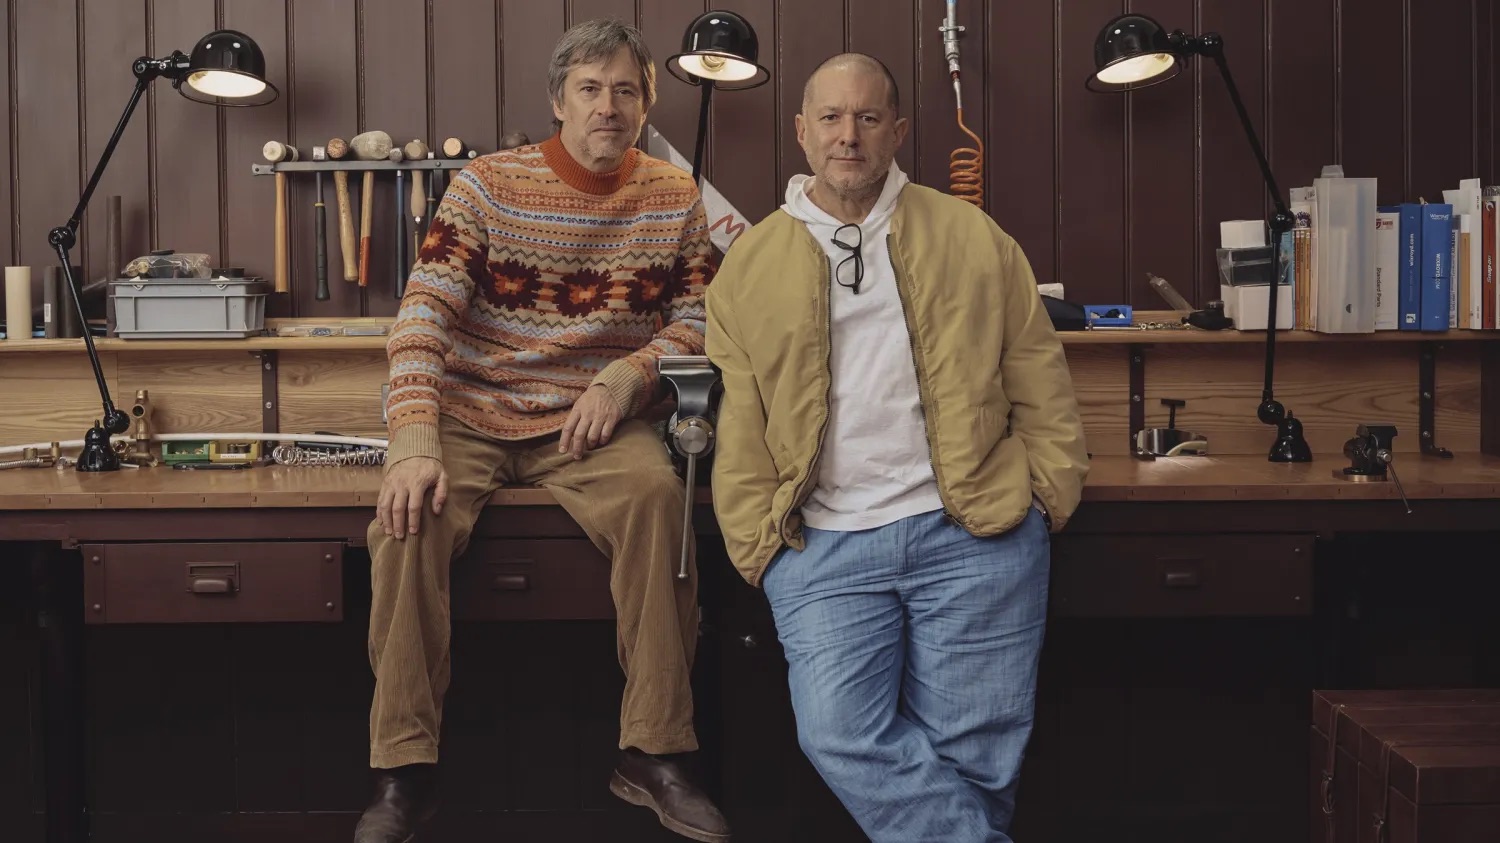 Apple's Jony Ive and Designer Marc Newson on Their Shared “Level